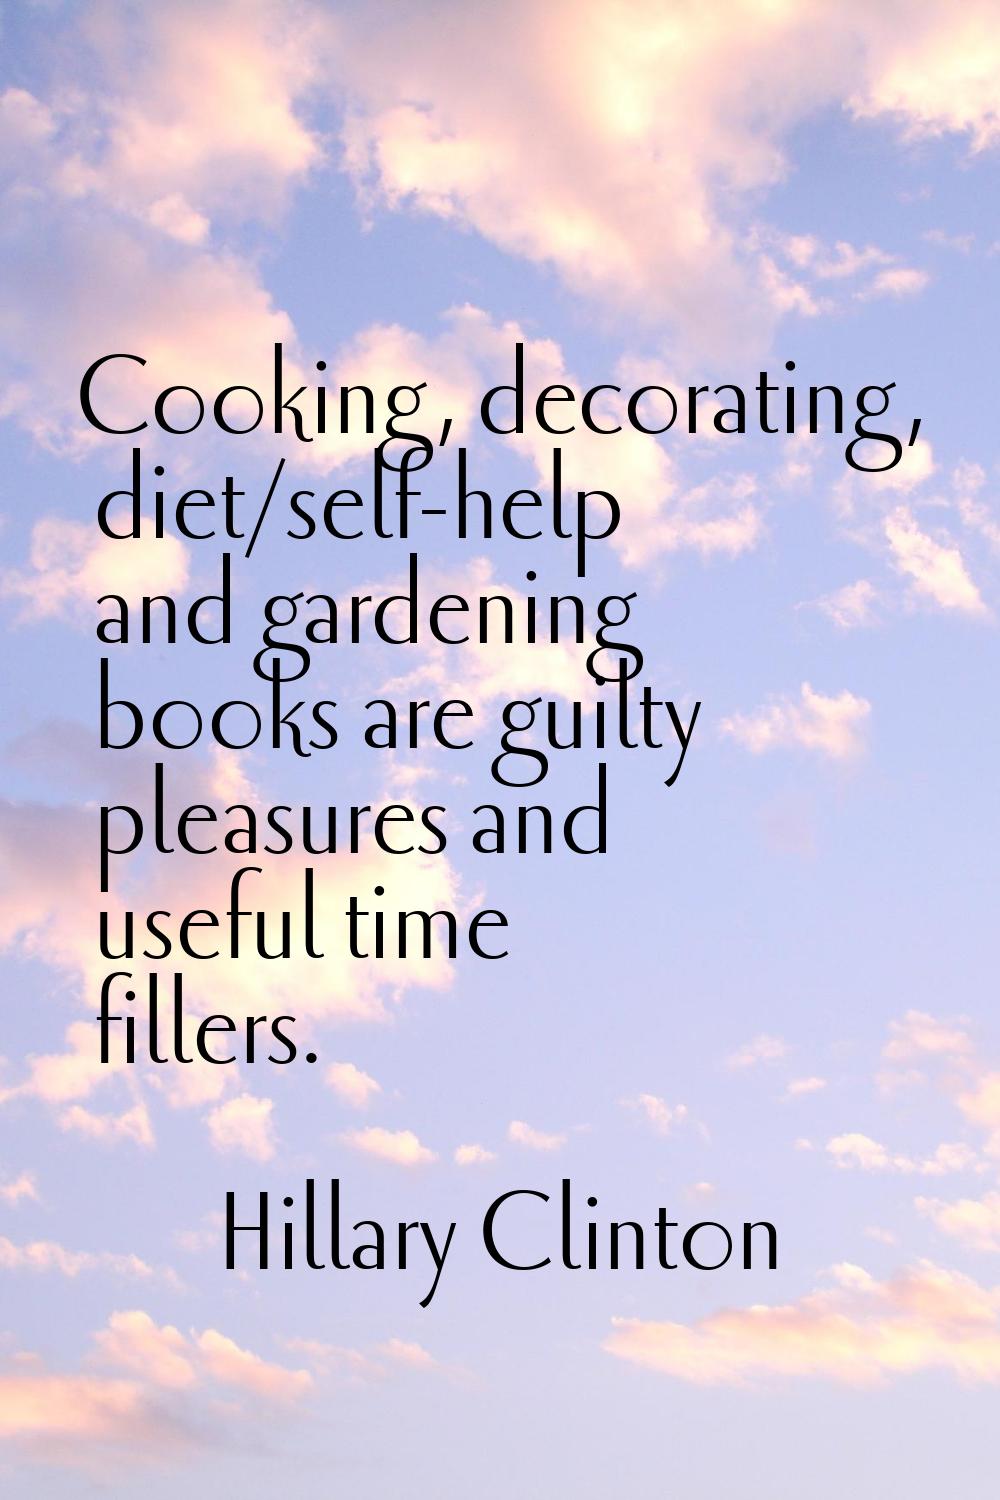 Cooking, decorating, diet/self-help and gardening books are guilty pleasures and useful time filler